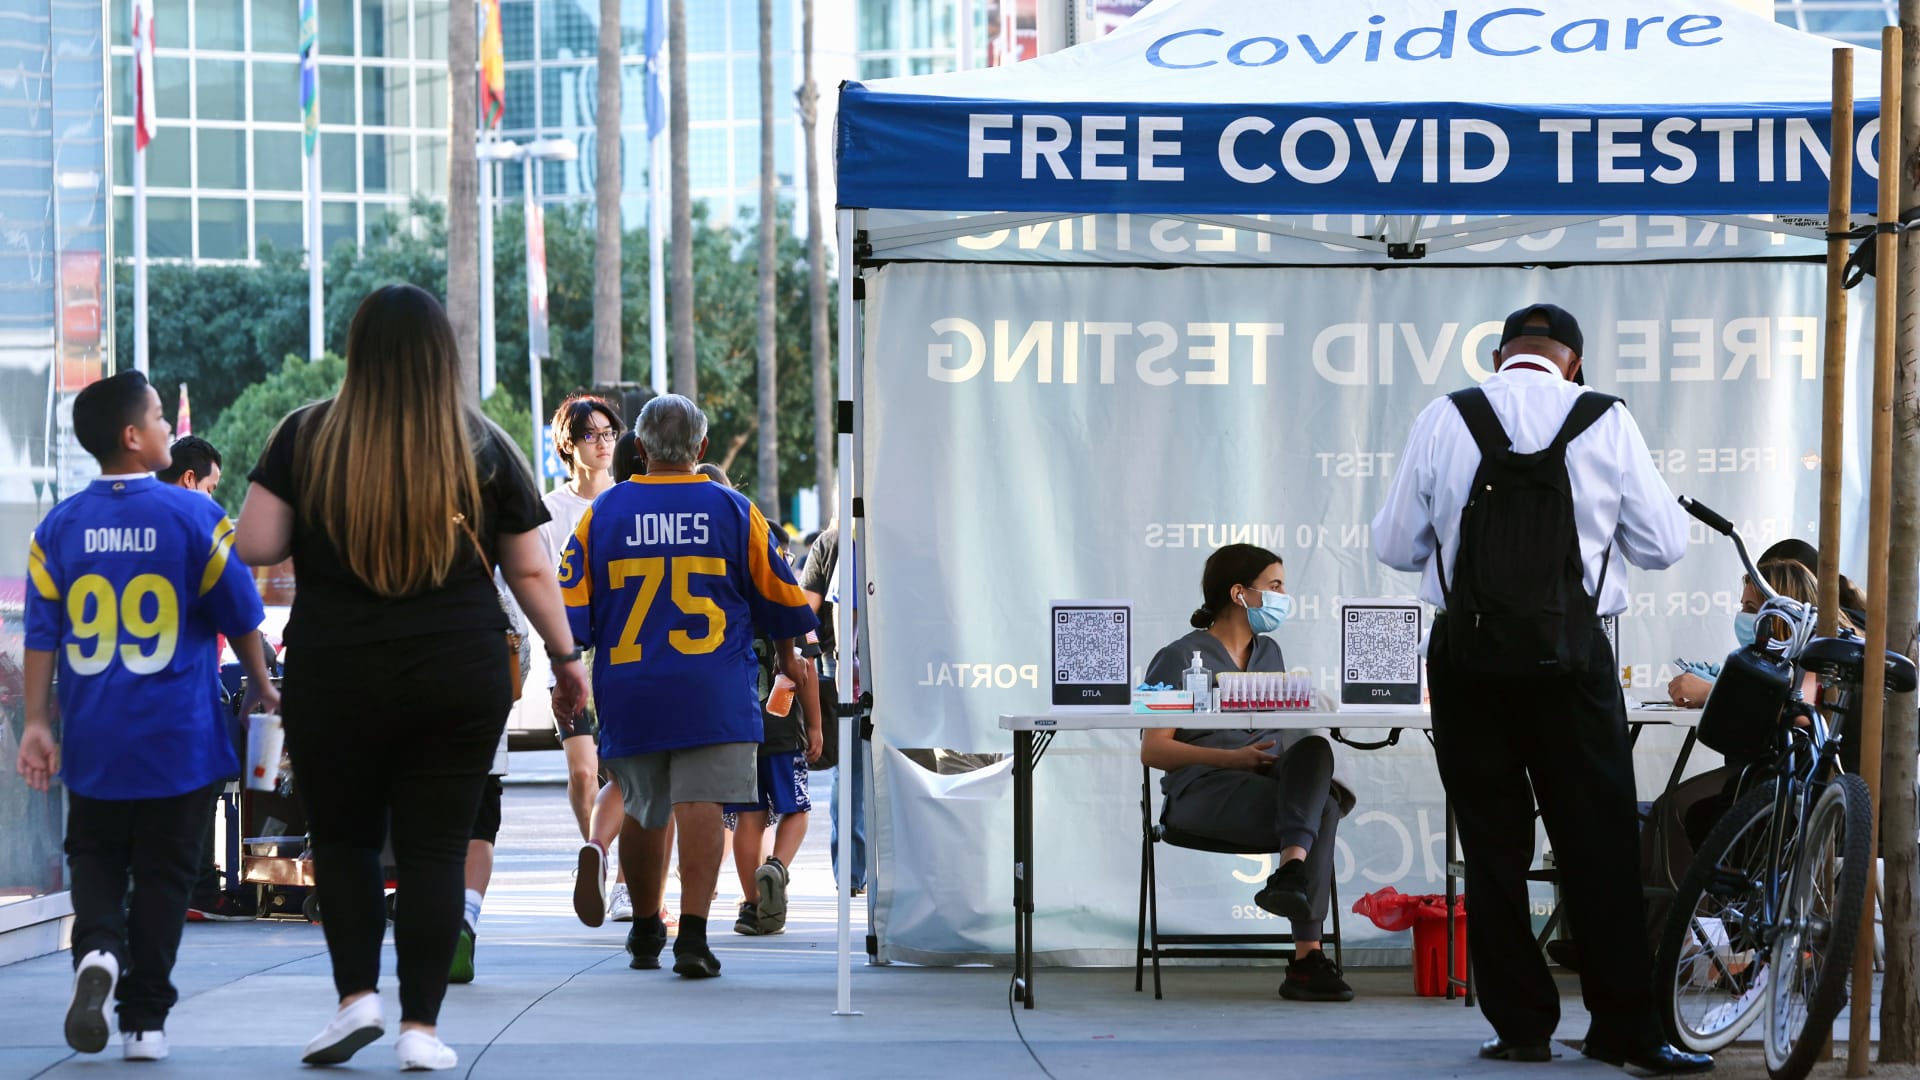 Free Covid testing outside the Los Angeles Convention Center.